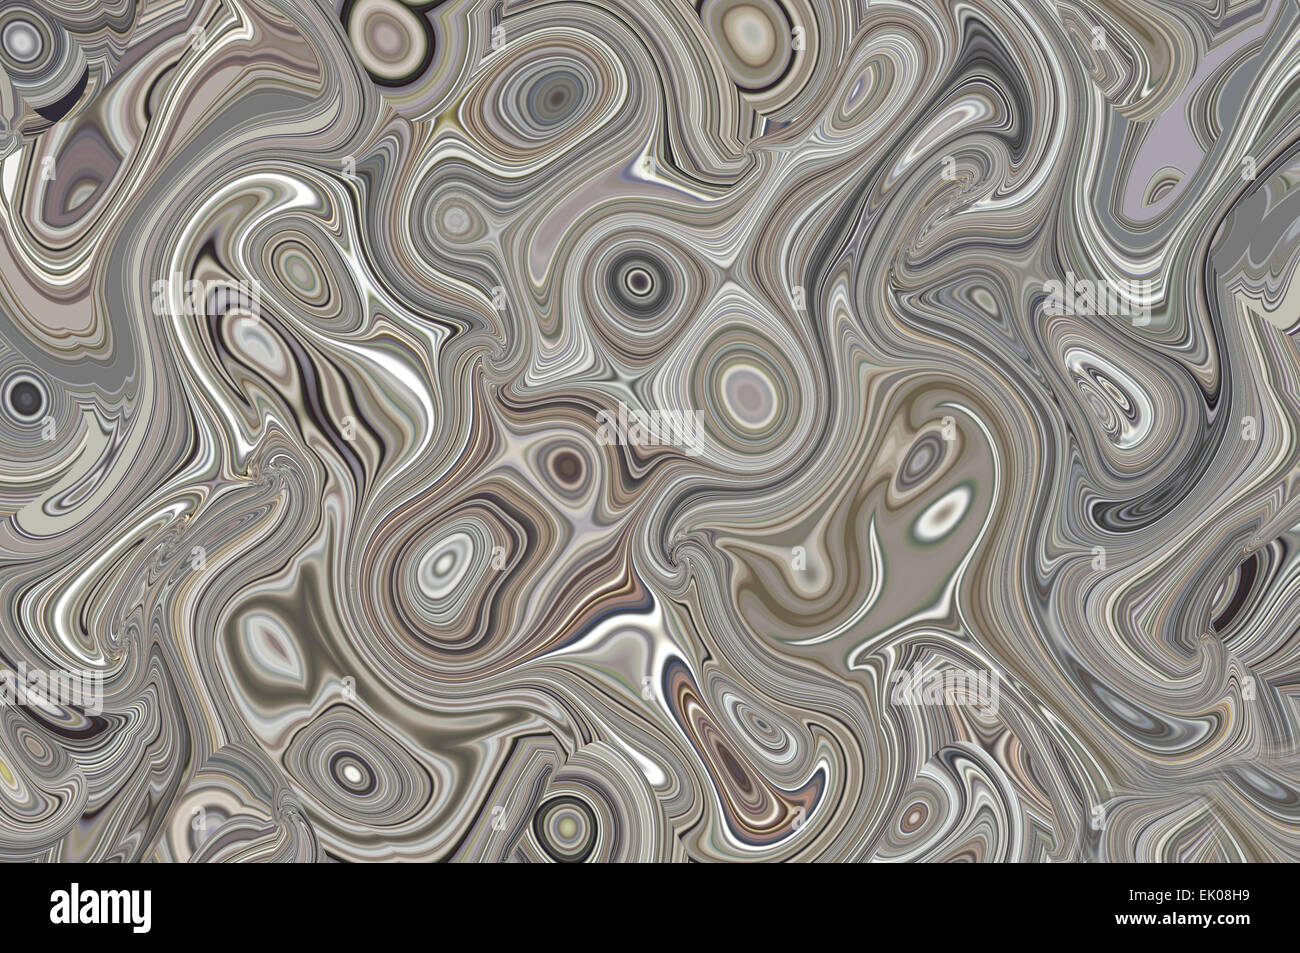 Abstract swirl pattern, created on a computer. Stock Photo